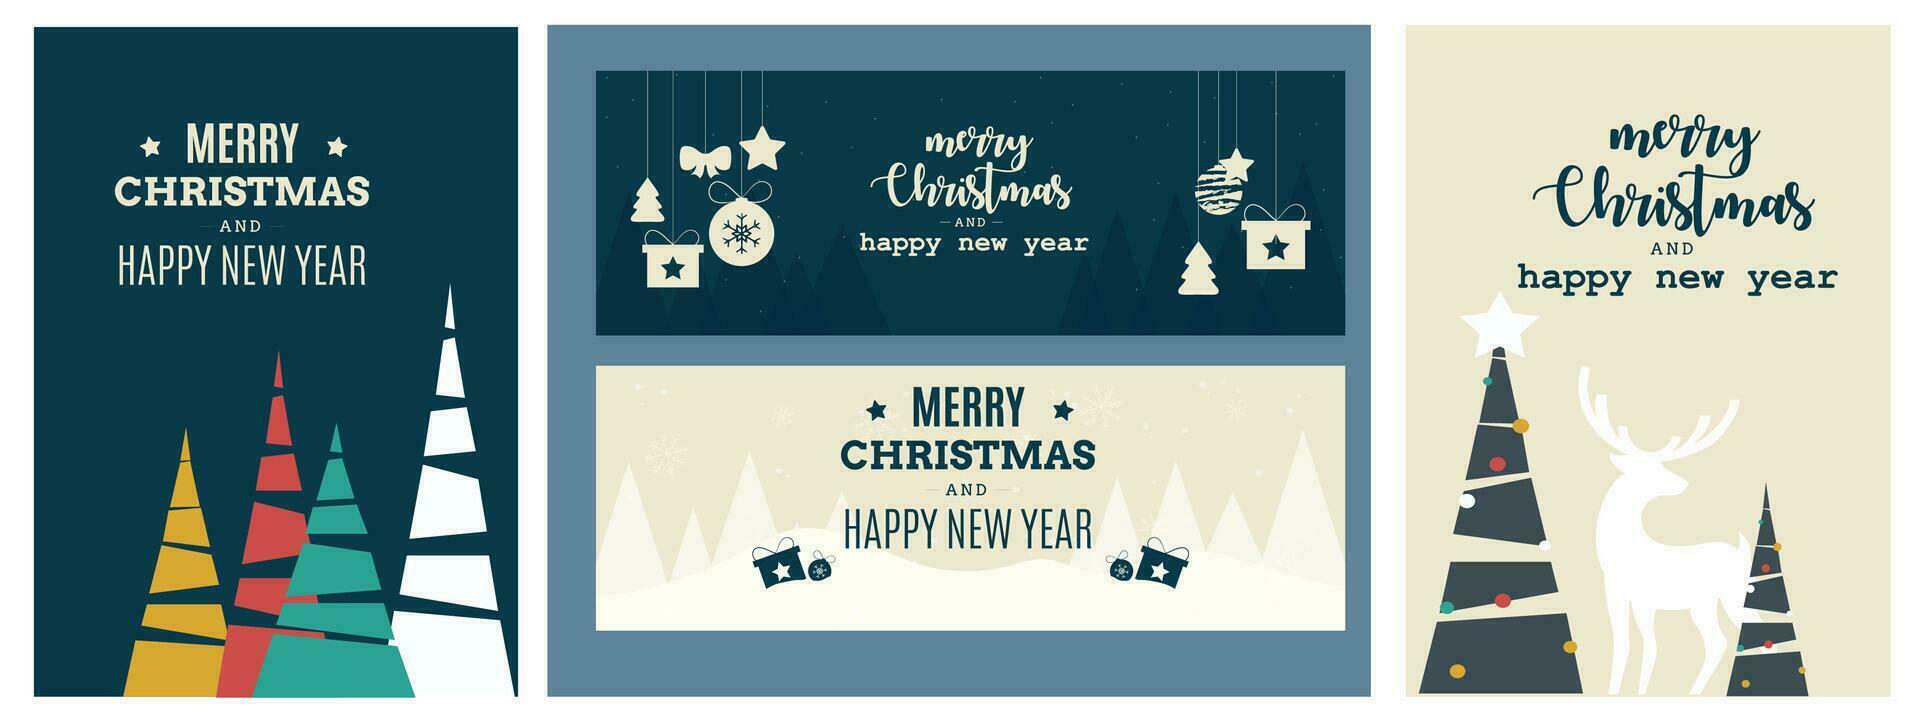 Christmas banner. Christmas background design of gift boxes. decorative green trees pine, stars, deer, lanterns. Christmas banner collection vector